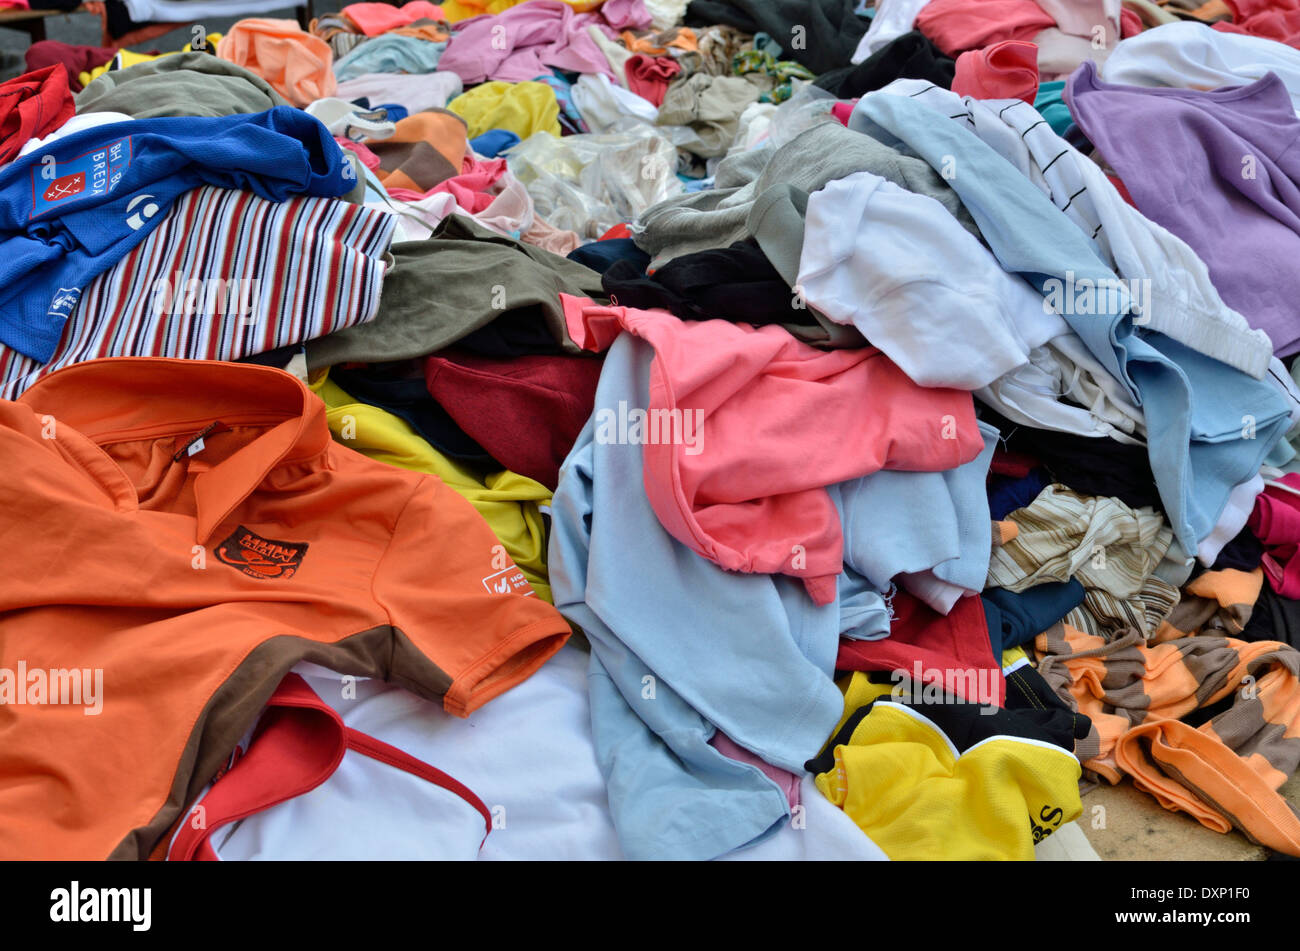 A pile of second hand clothes on a market stall, London, UK Stock Photo